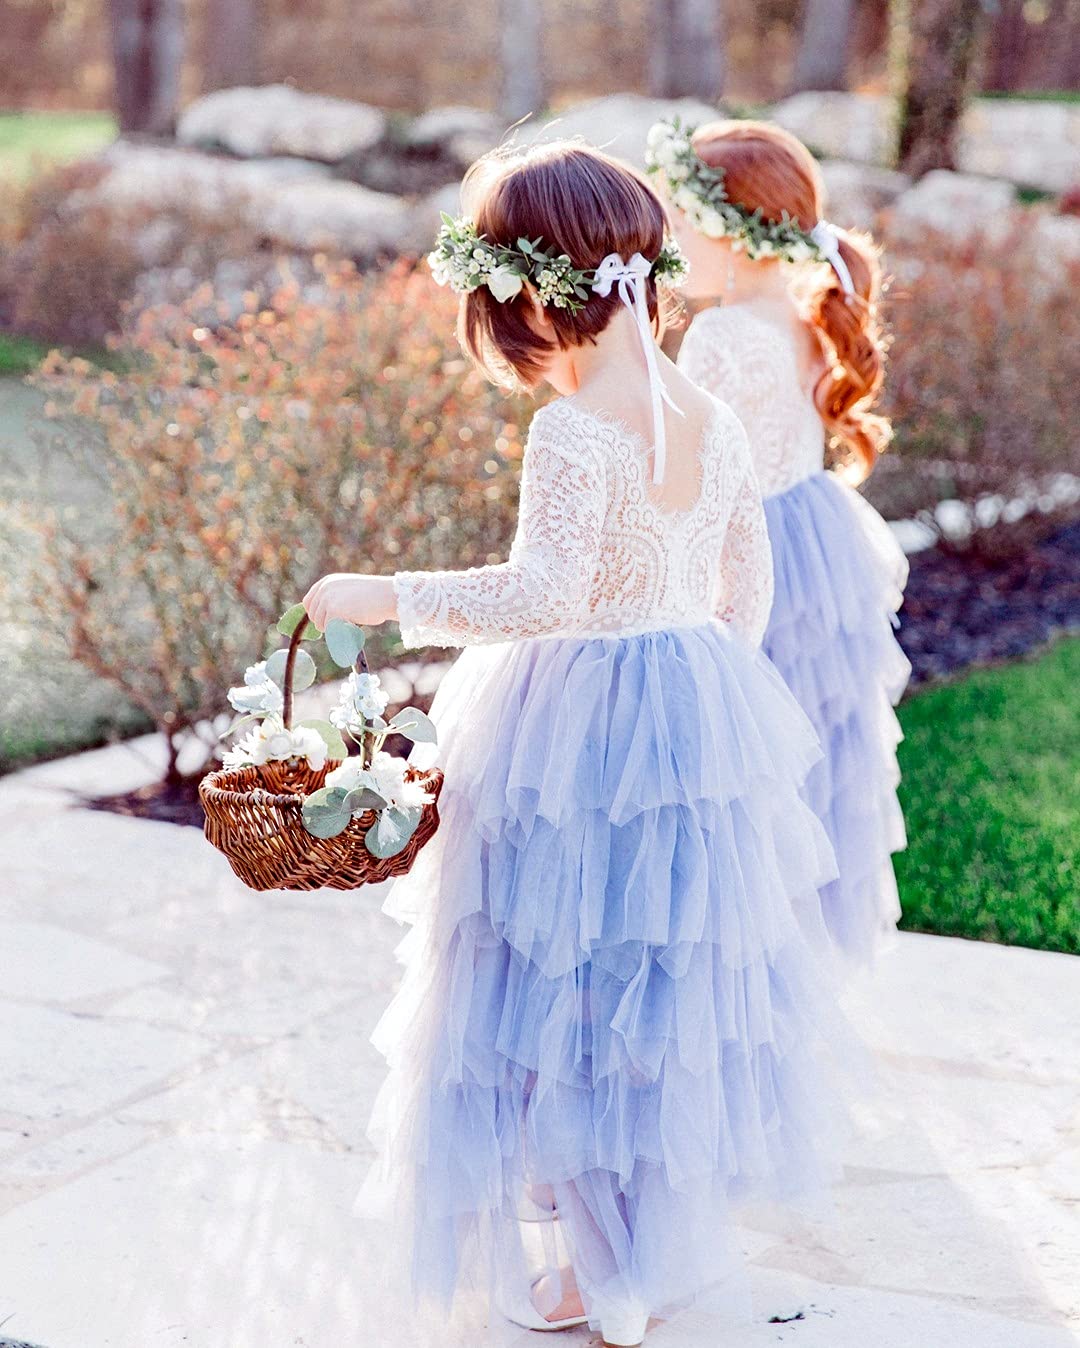 2Bunnies Flower Girl Dress Peony Lace Back A-Line Long Sleeve Tiered Tulle Maxi (Bluish Gray) - 2BUNNIES